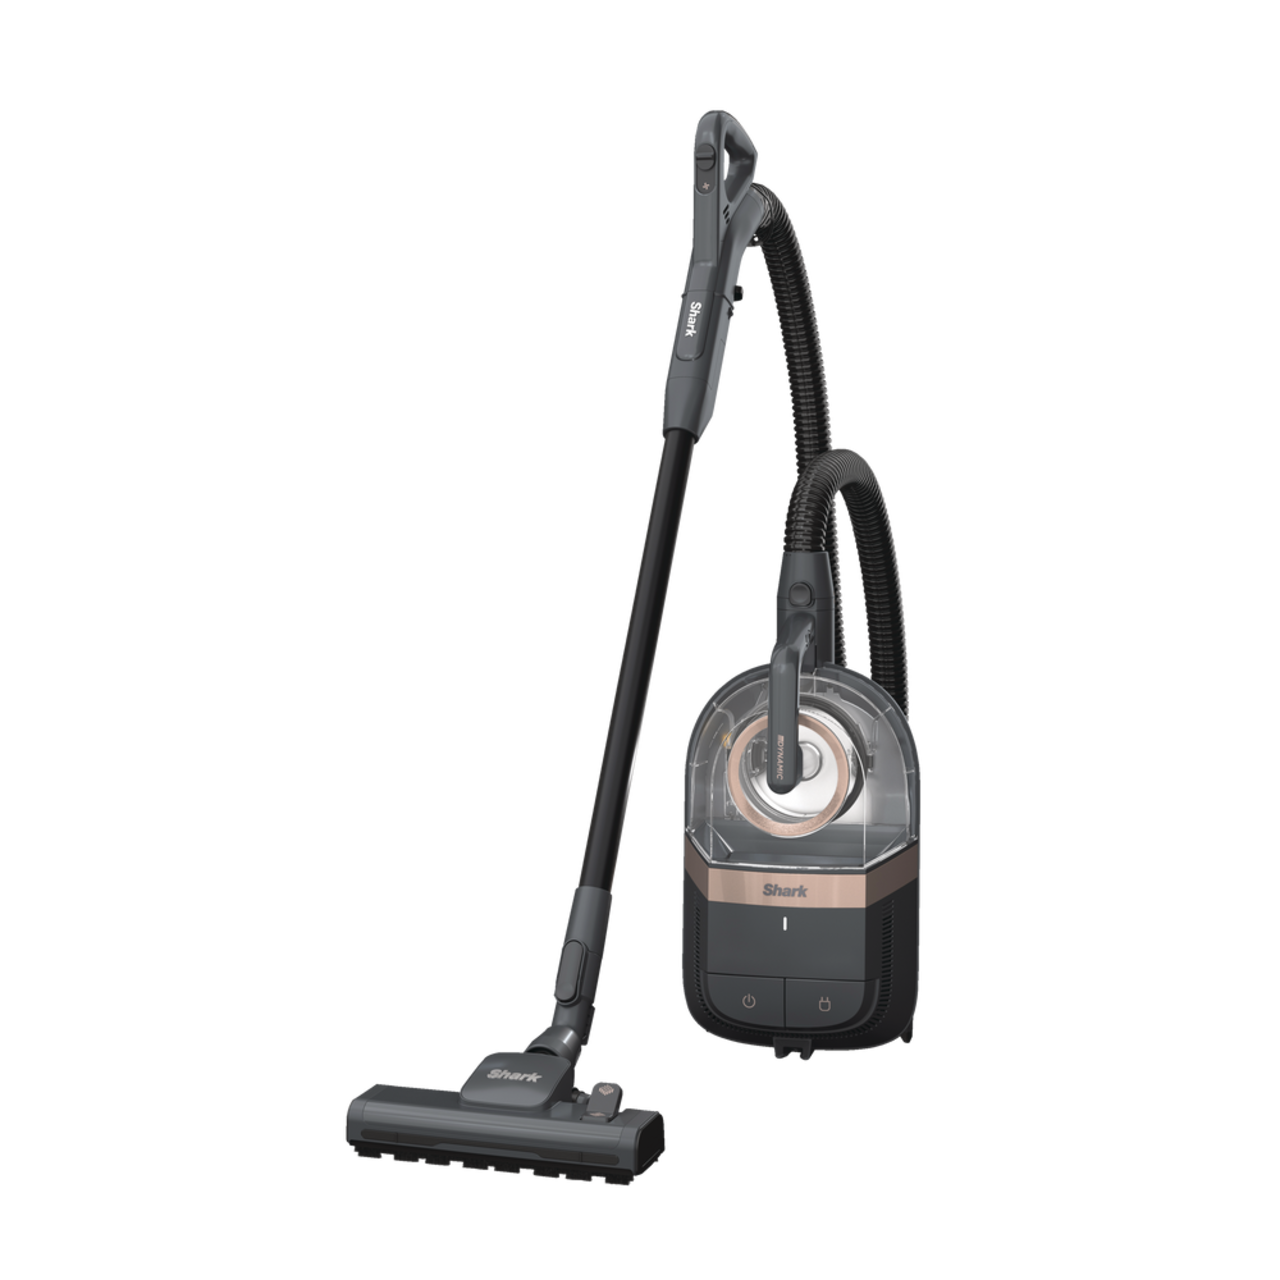 https://media-www.canadiantire.ca/product/living/cleaning/vacuums-and-floorcare/0439420/shark-bagless-corded-canister-vacuum-01db79ba-8206-4998-9f15-0763518141e0.png?imdensity=1&imwidth=640&impolicy=mZoom